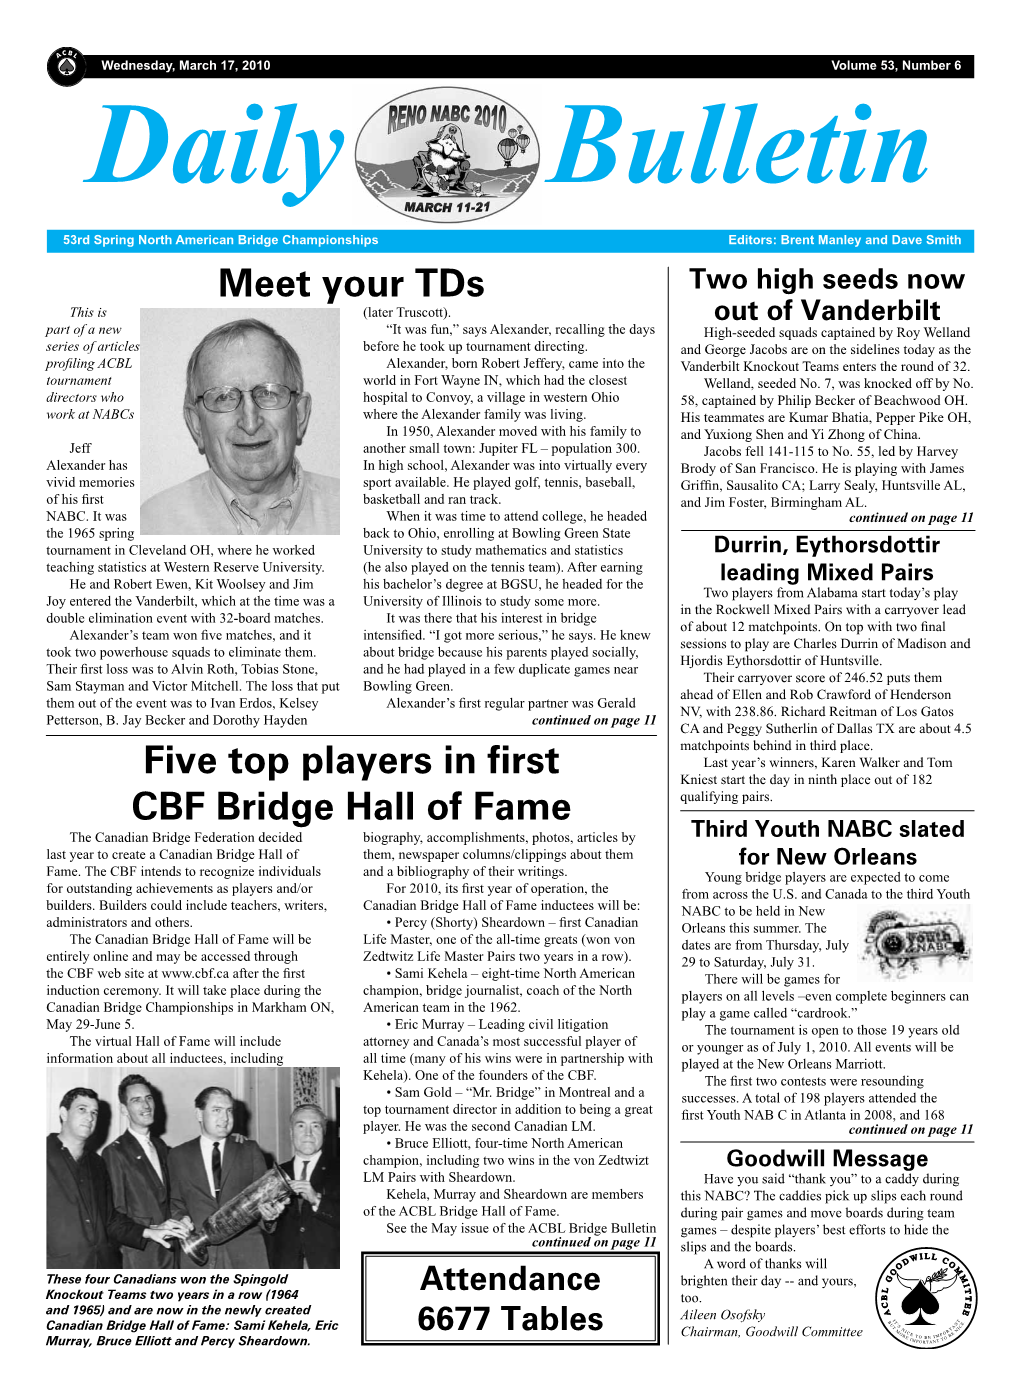 Five Top Players in First CBF Bridge Hall of Fame Meet Your